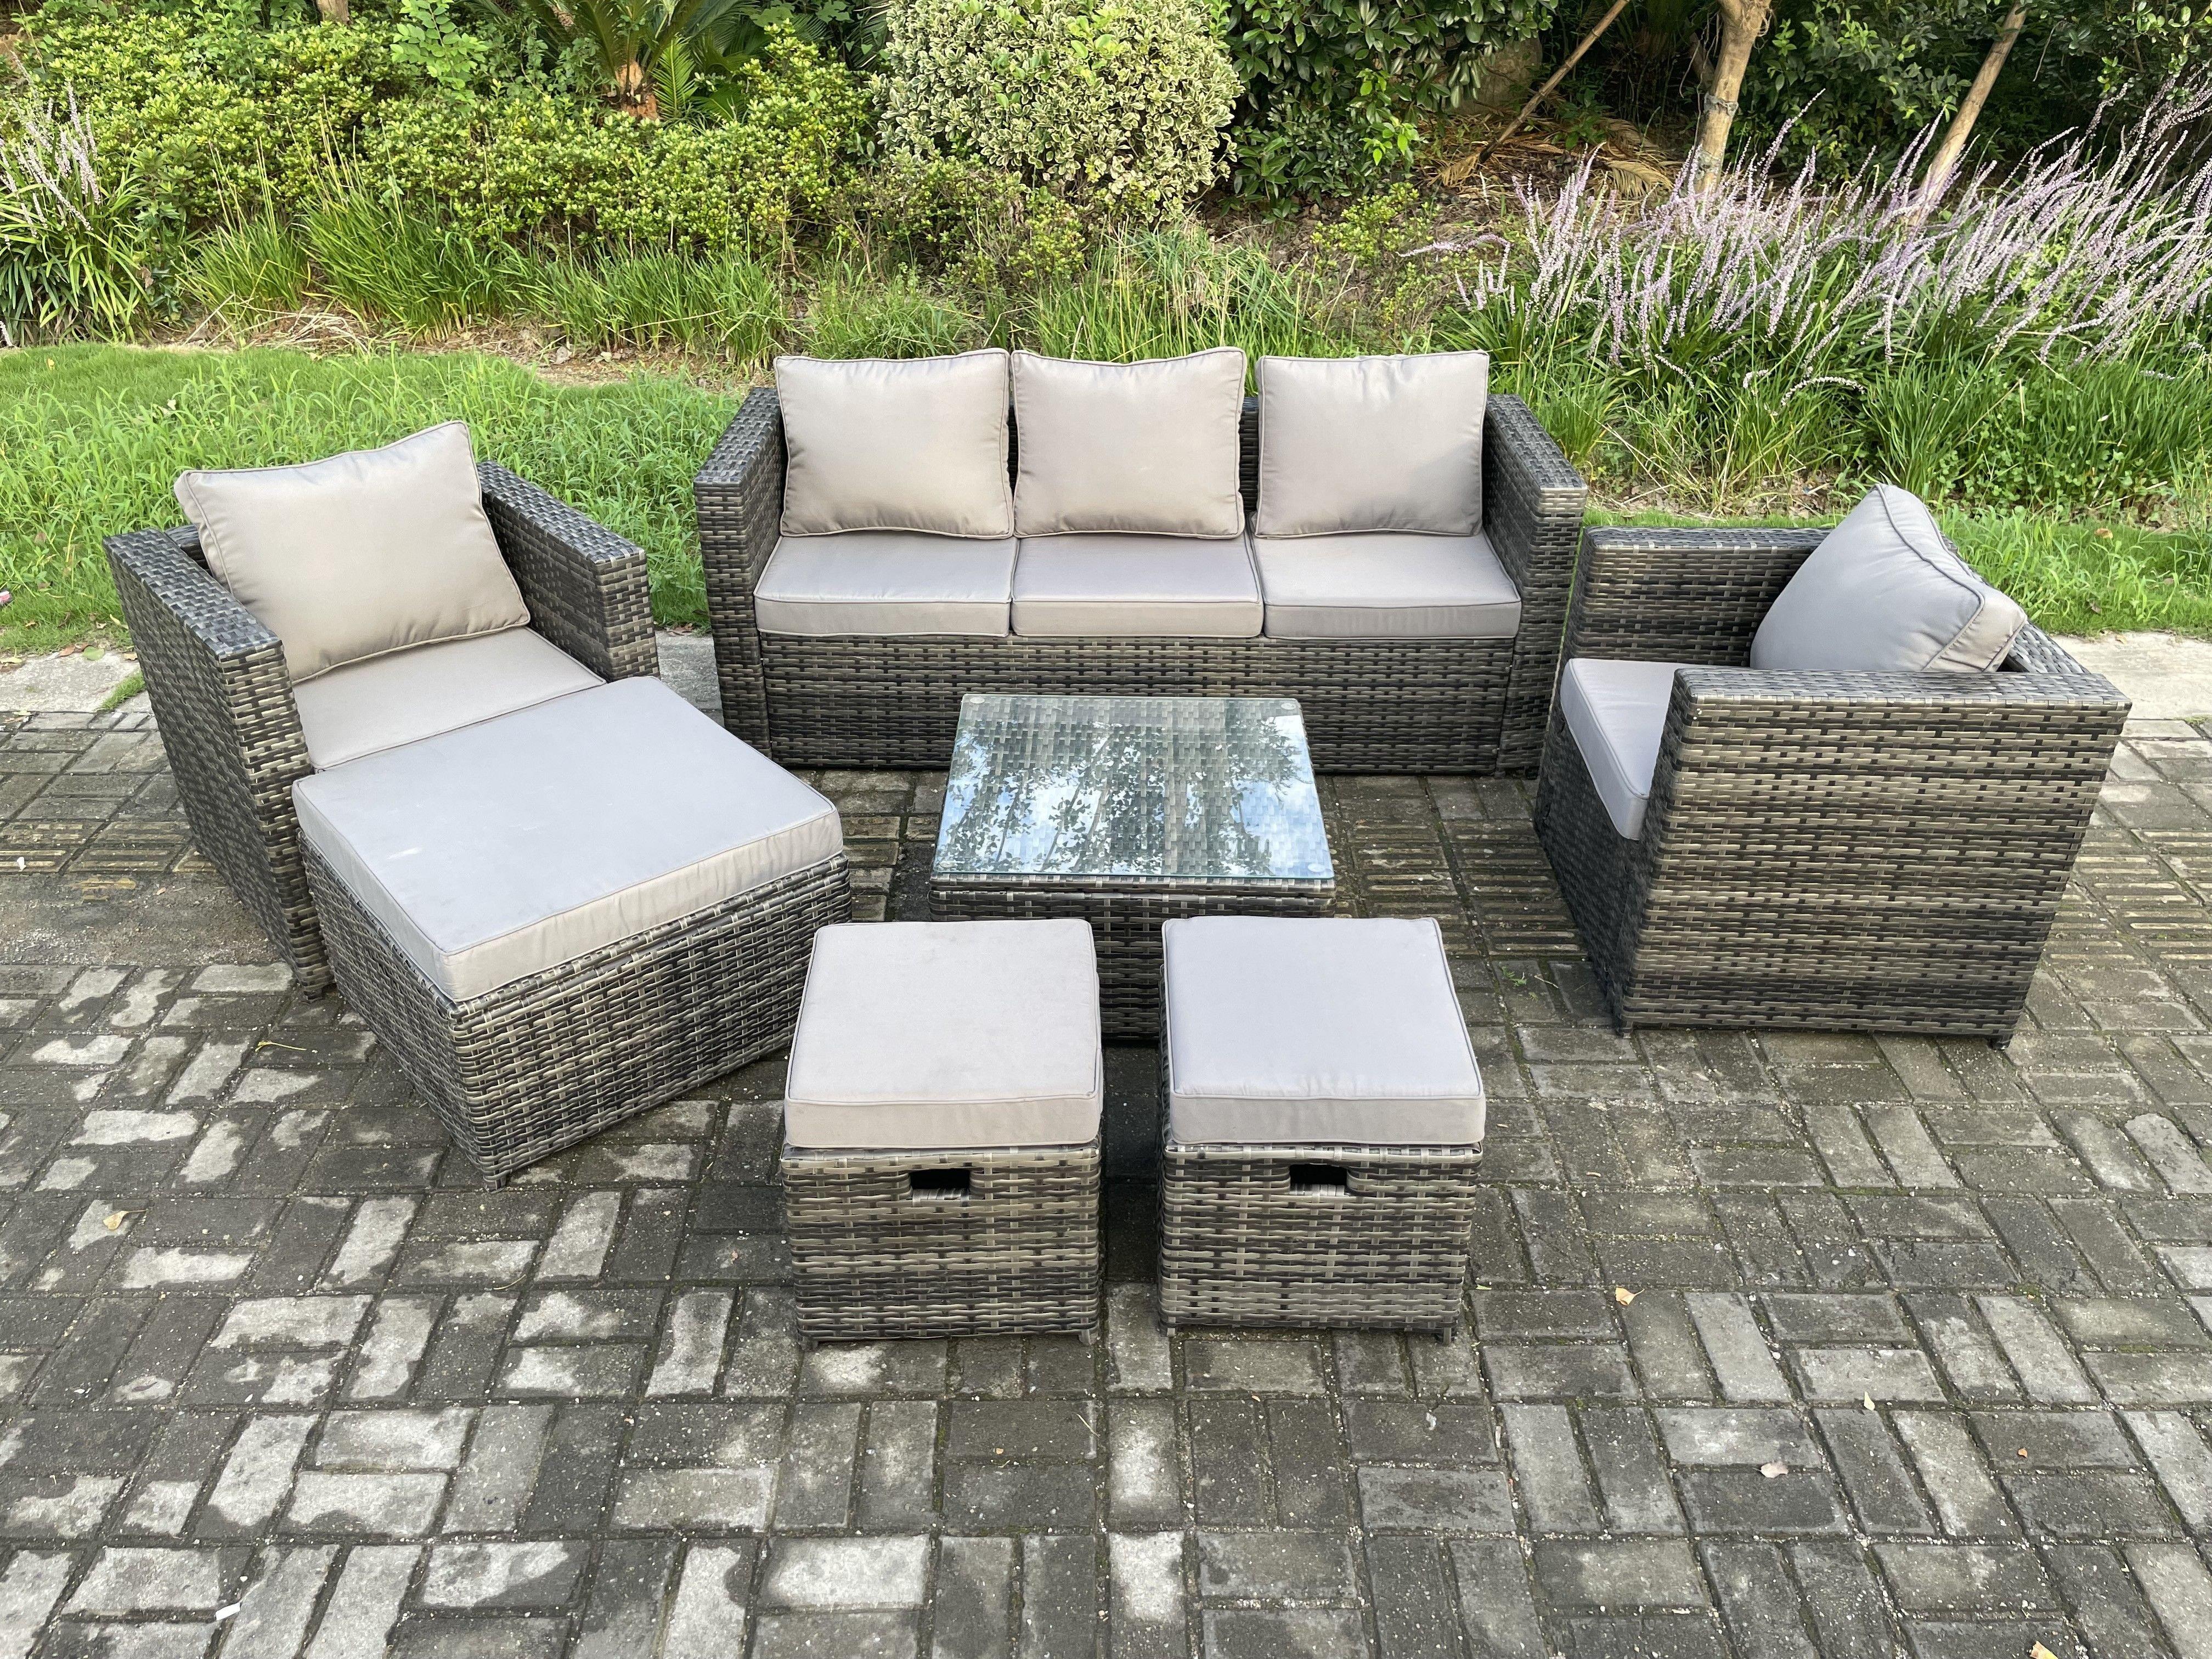 Wicker Rattan Garden Furniture Sofa Set With Armchair Square Coffee Table 3 Footstools Dark Grey Mixed